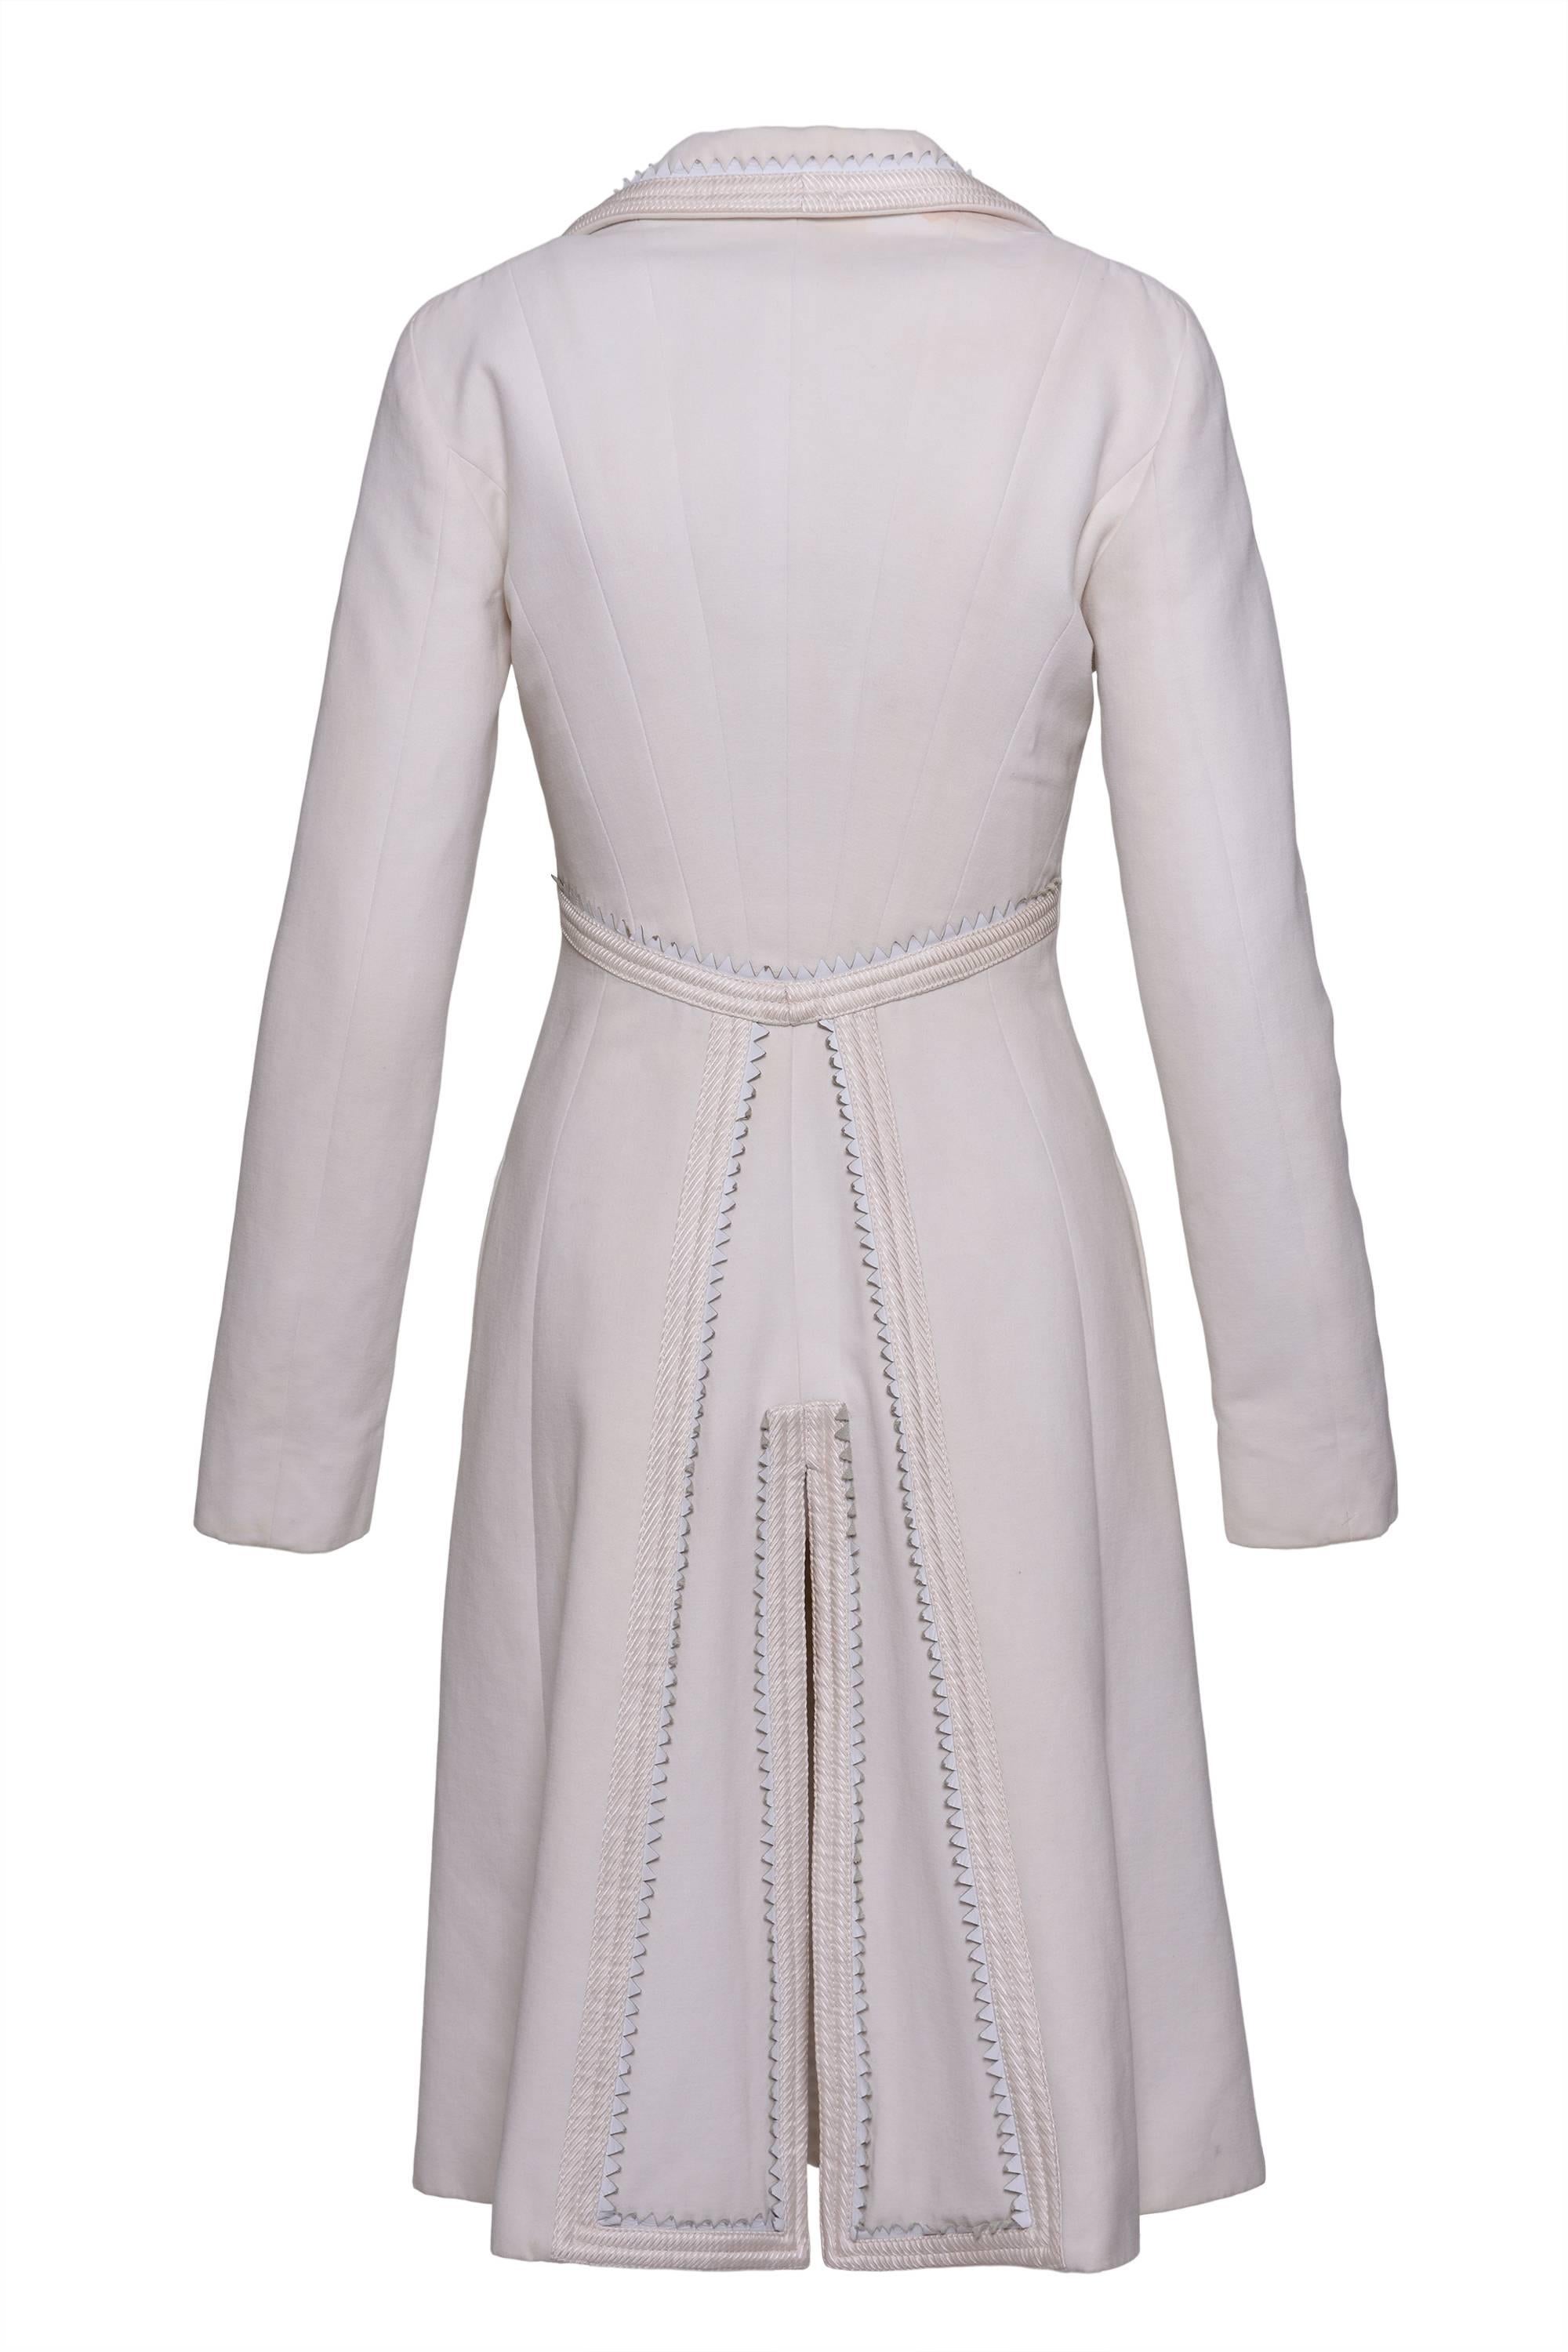 This gorgeous 1990s GIANNI VERSACE Couture white coat is in gabardine wool fabric whit trimming satin and leather white details. It has snaps and hooks closure and is fully logo satin lined.

Good Vintage Condition 

Label: Gianni Versace Couture -